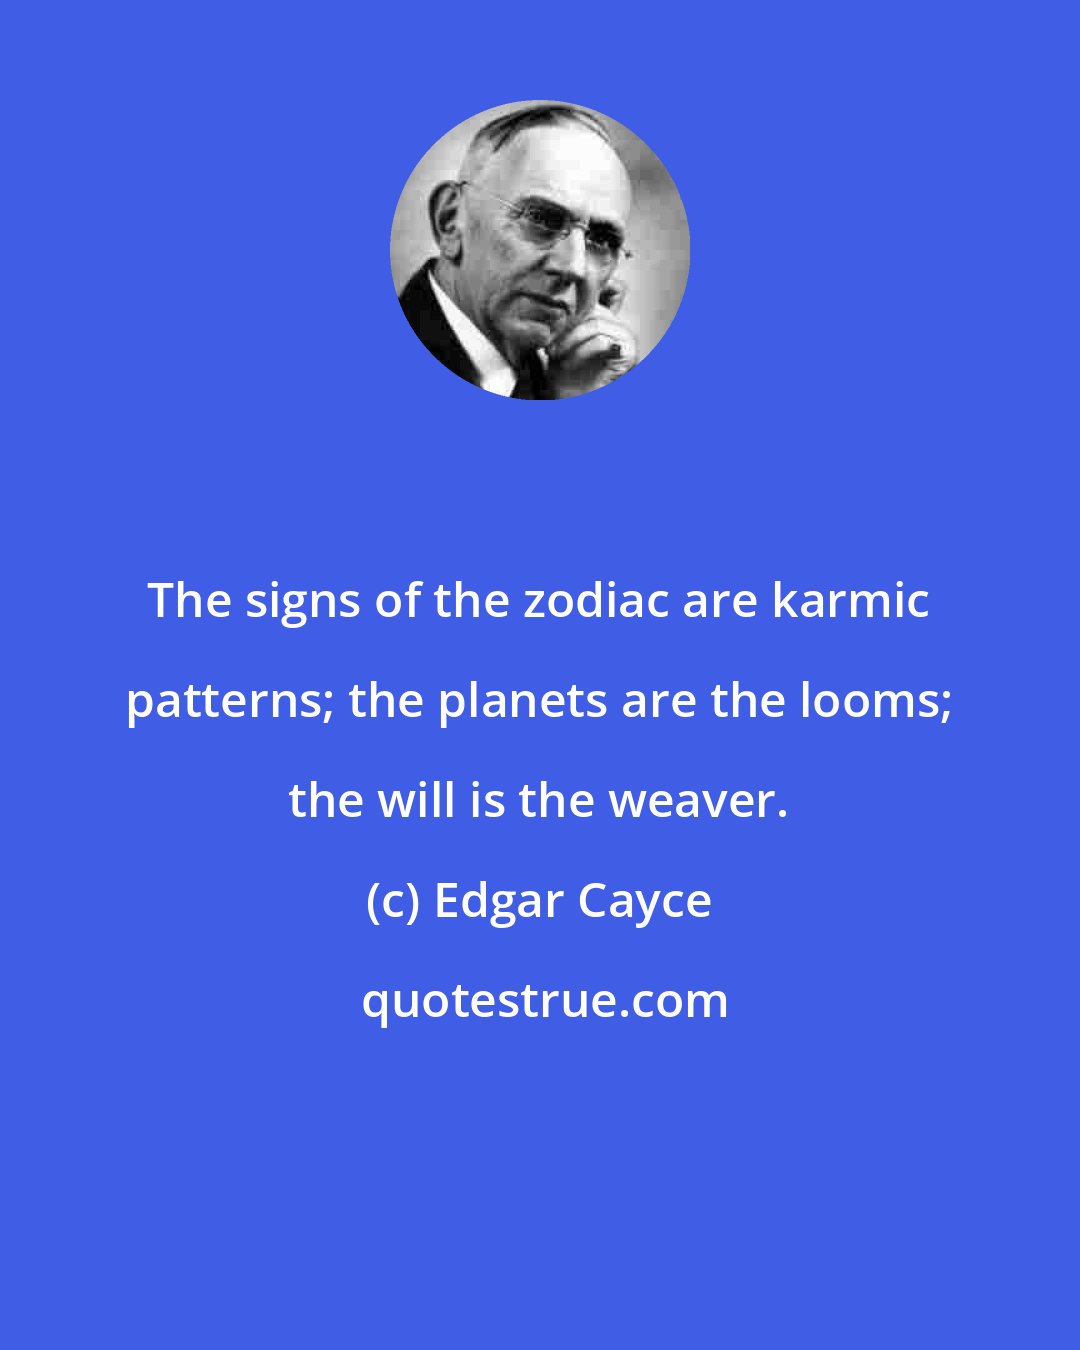 Edgar Cayce: The signs of the zodiac are karmic patterns; the planets are the looms; the will is the weaver.